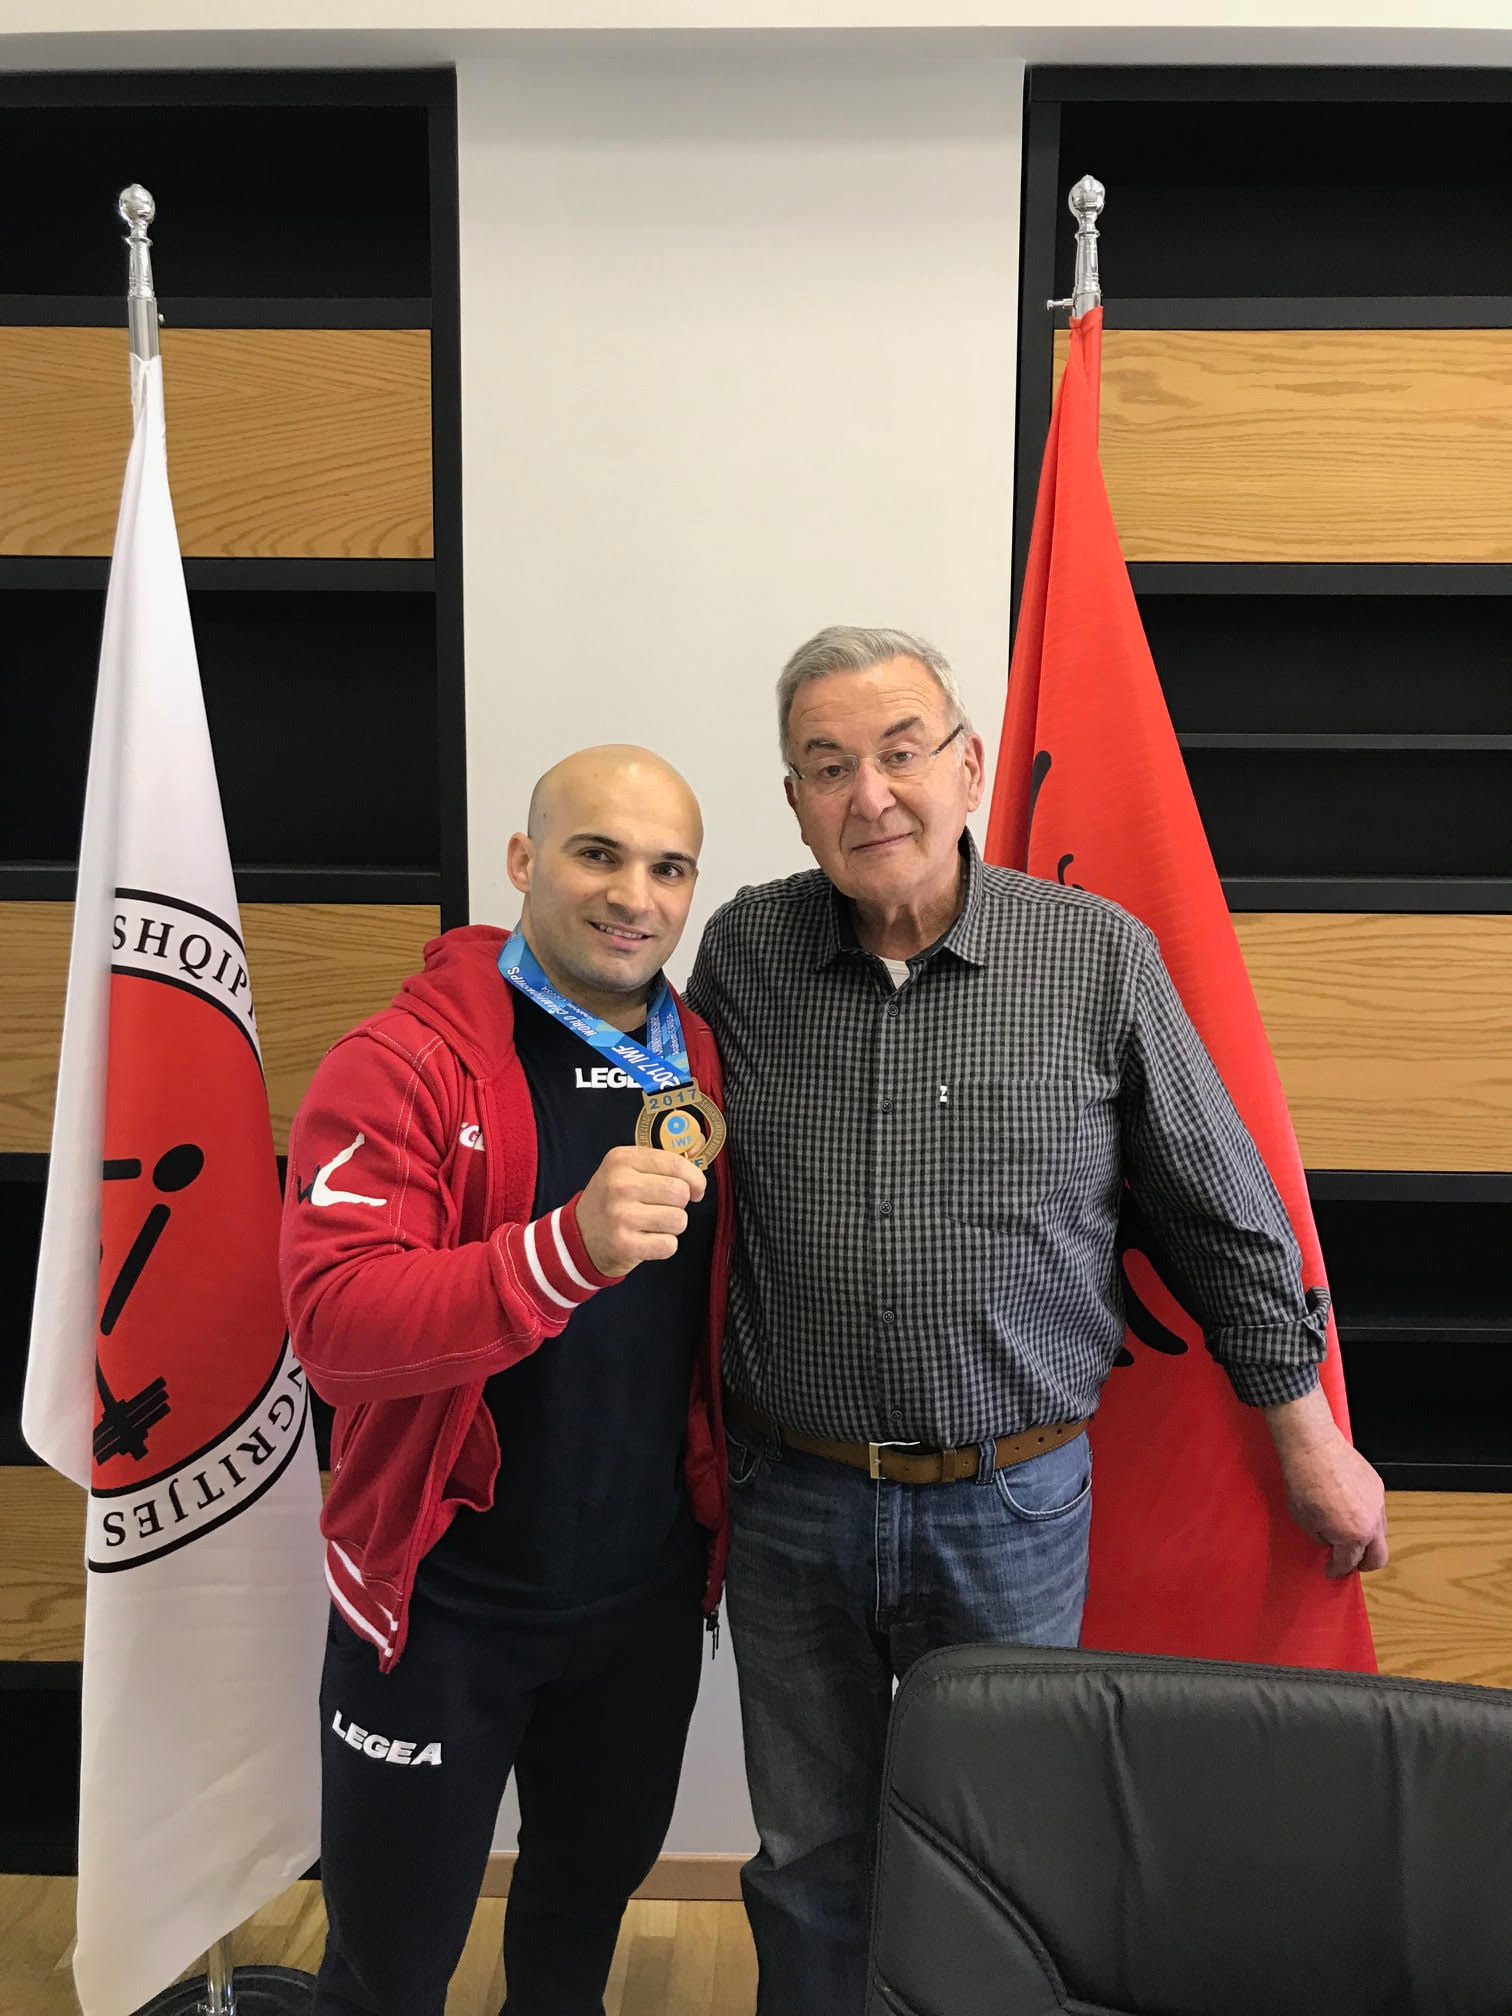 Albania's Erkand Qerimaj, pictured with his coach Zef Kovaçi, claimed he had never given up hope of making it to Tokyo 2020 ©Erkand Qerimaj